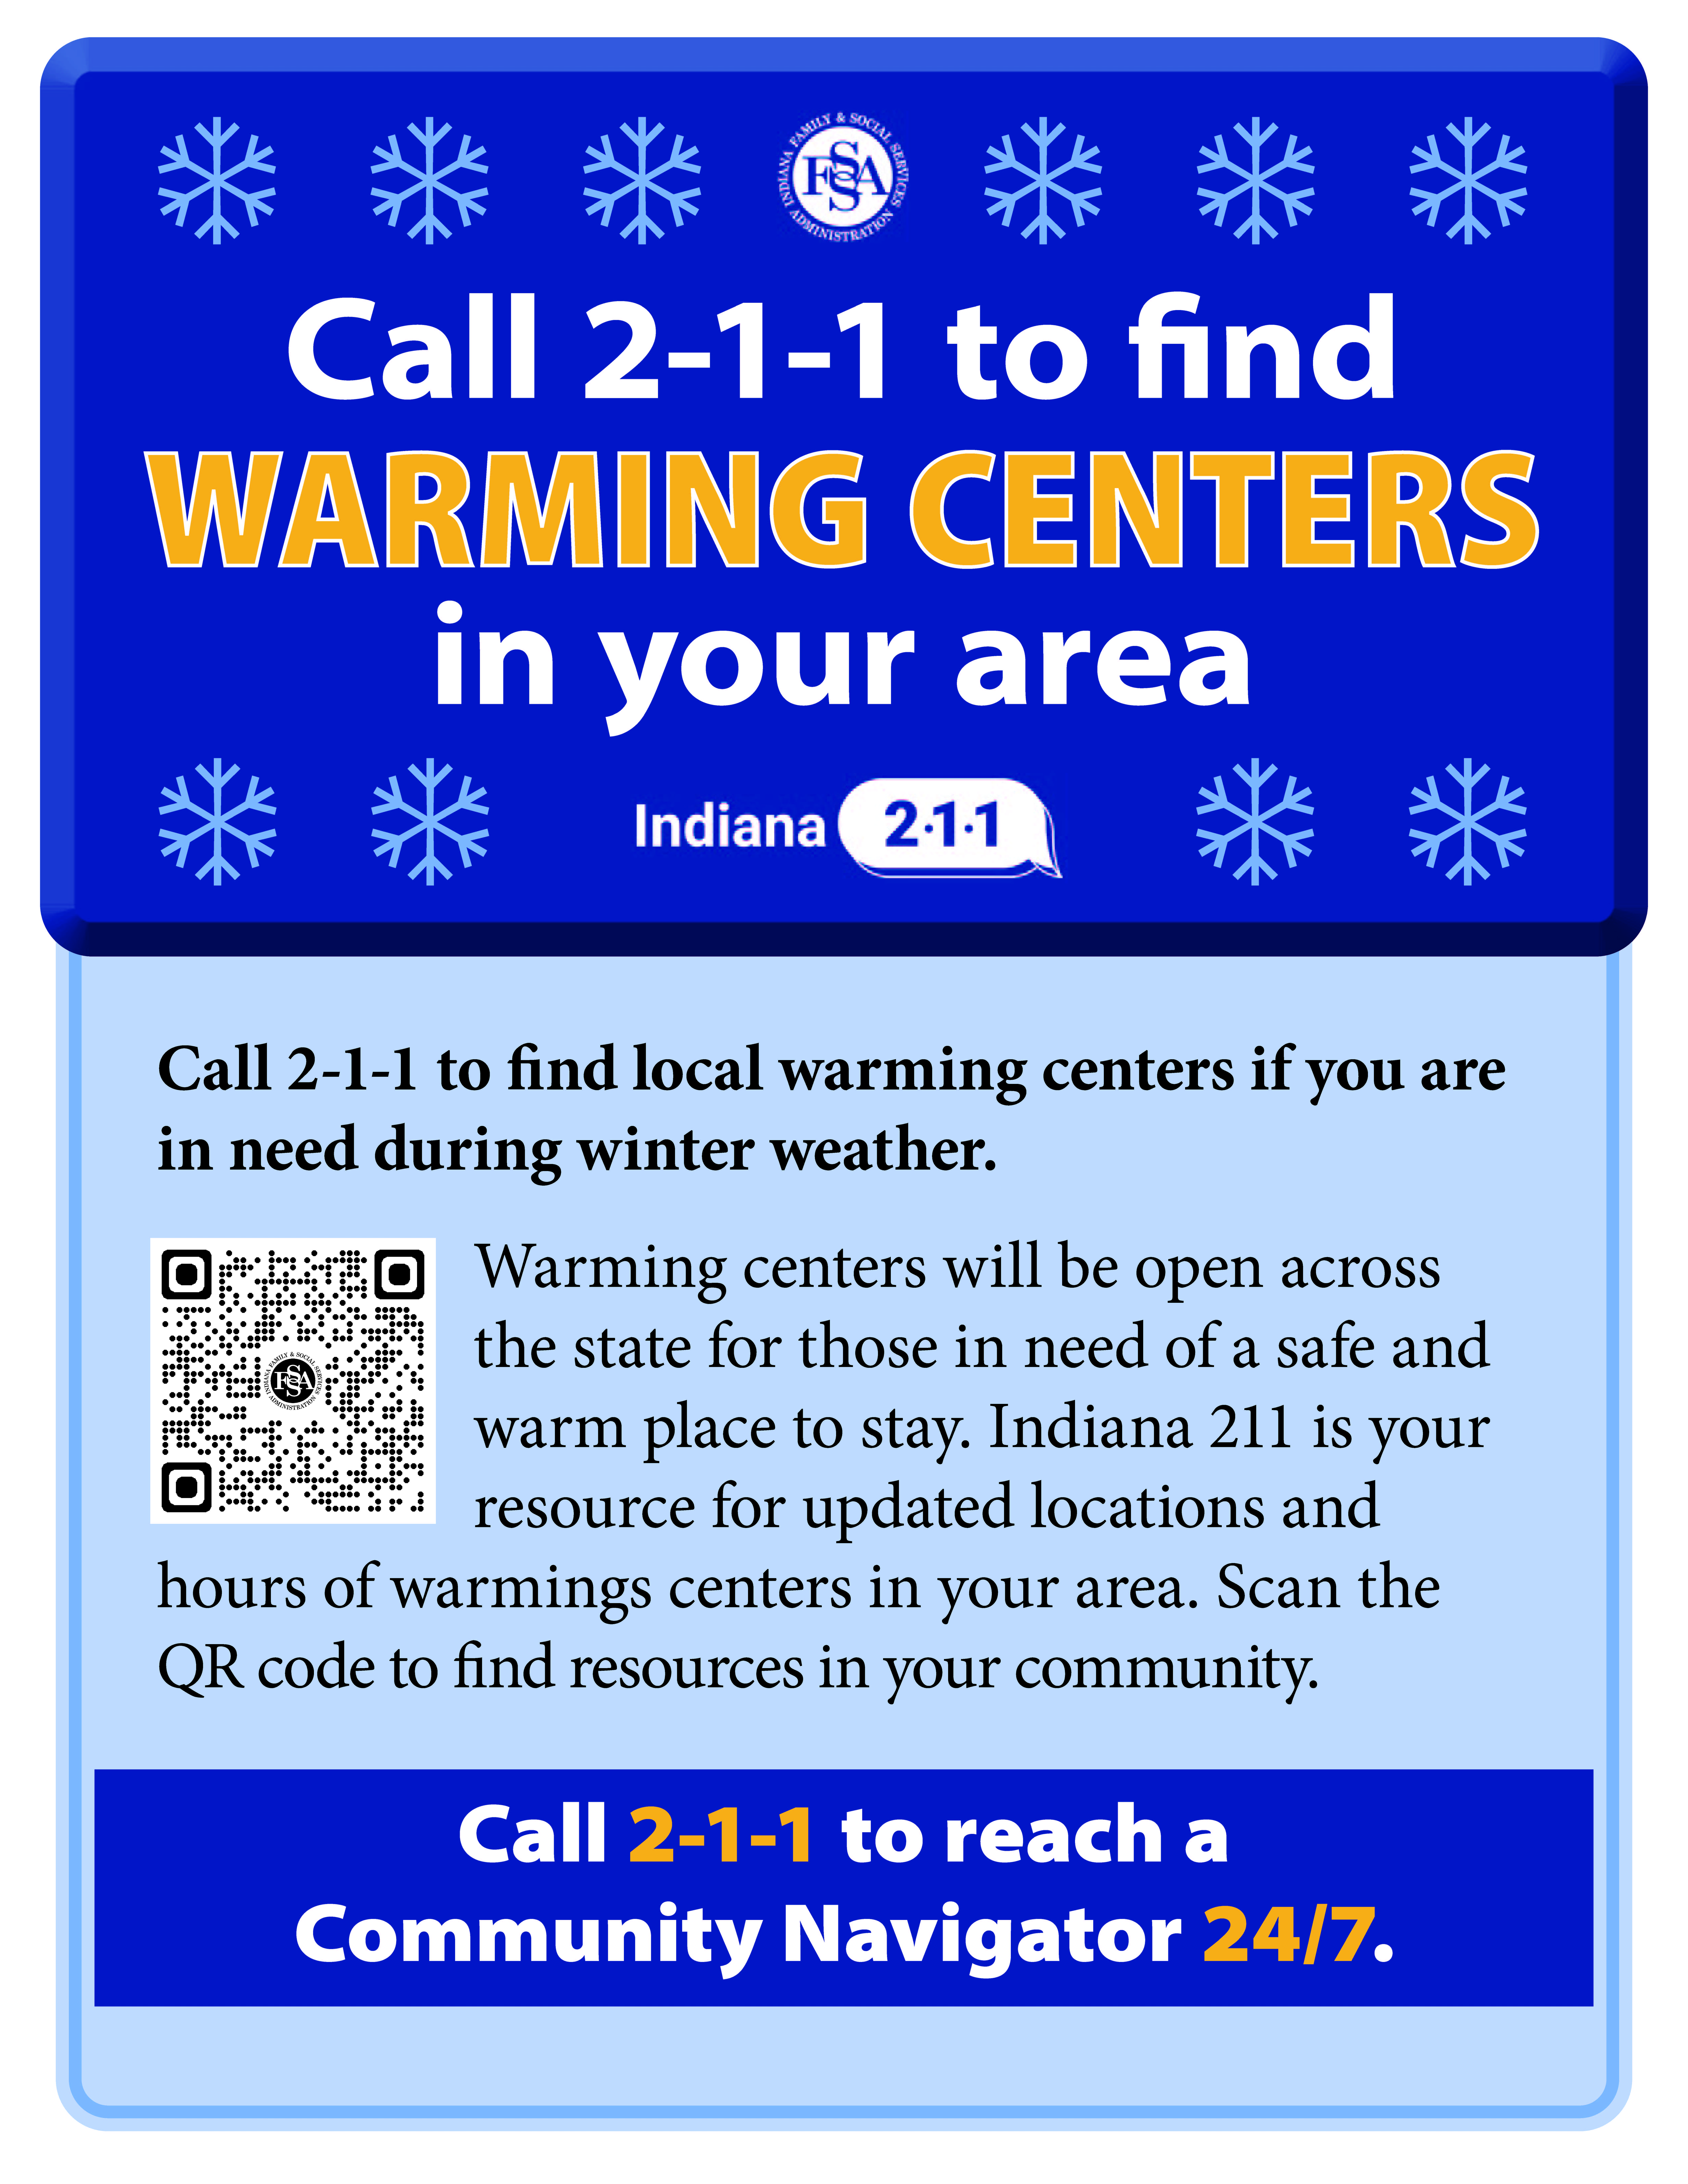 CALL 211 to find Warming Centers in your area